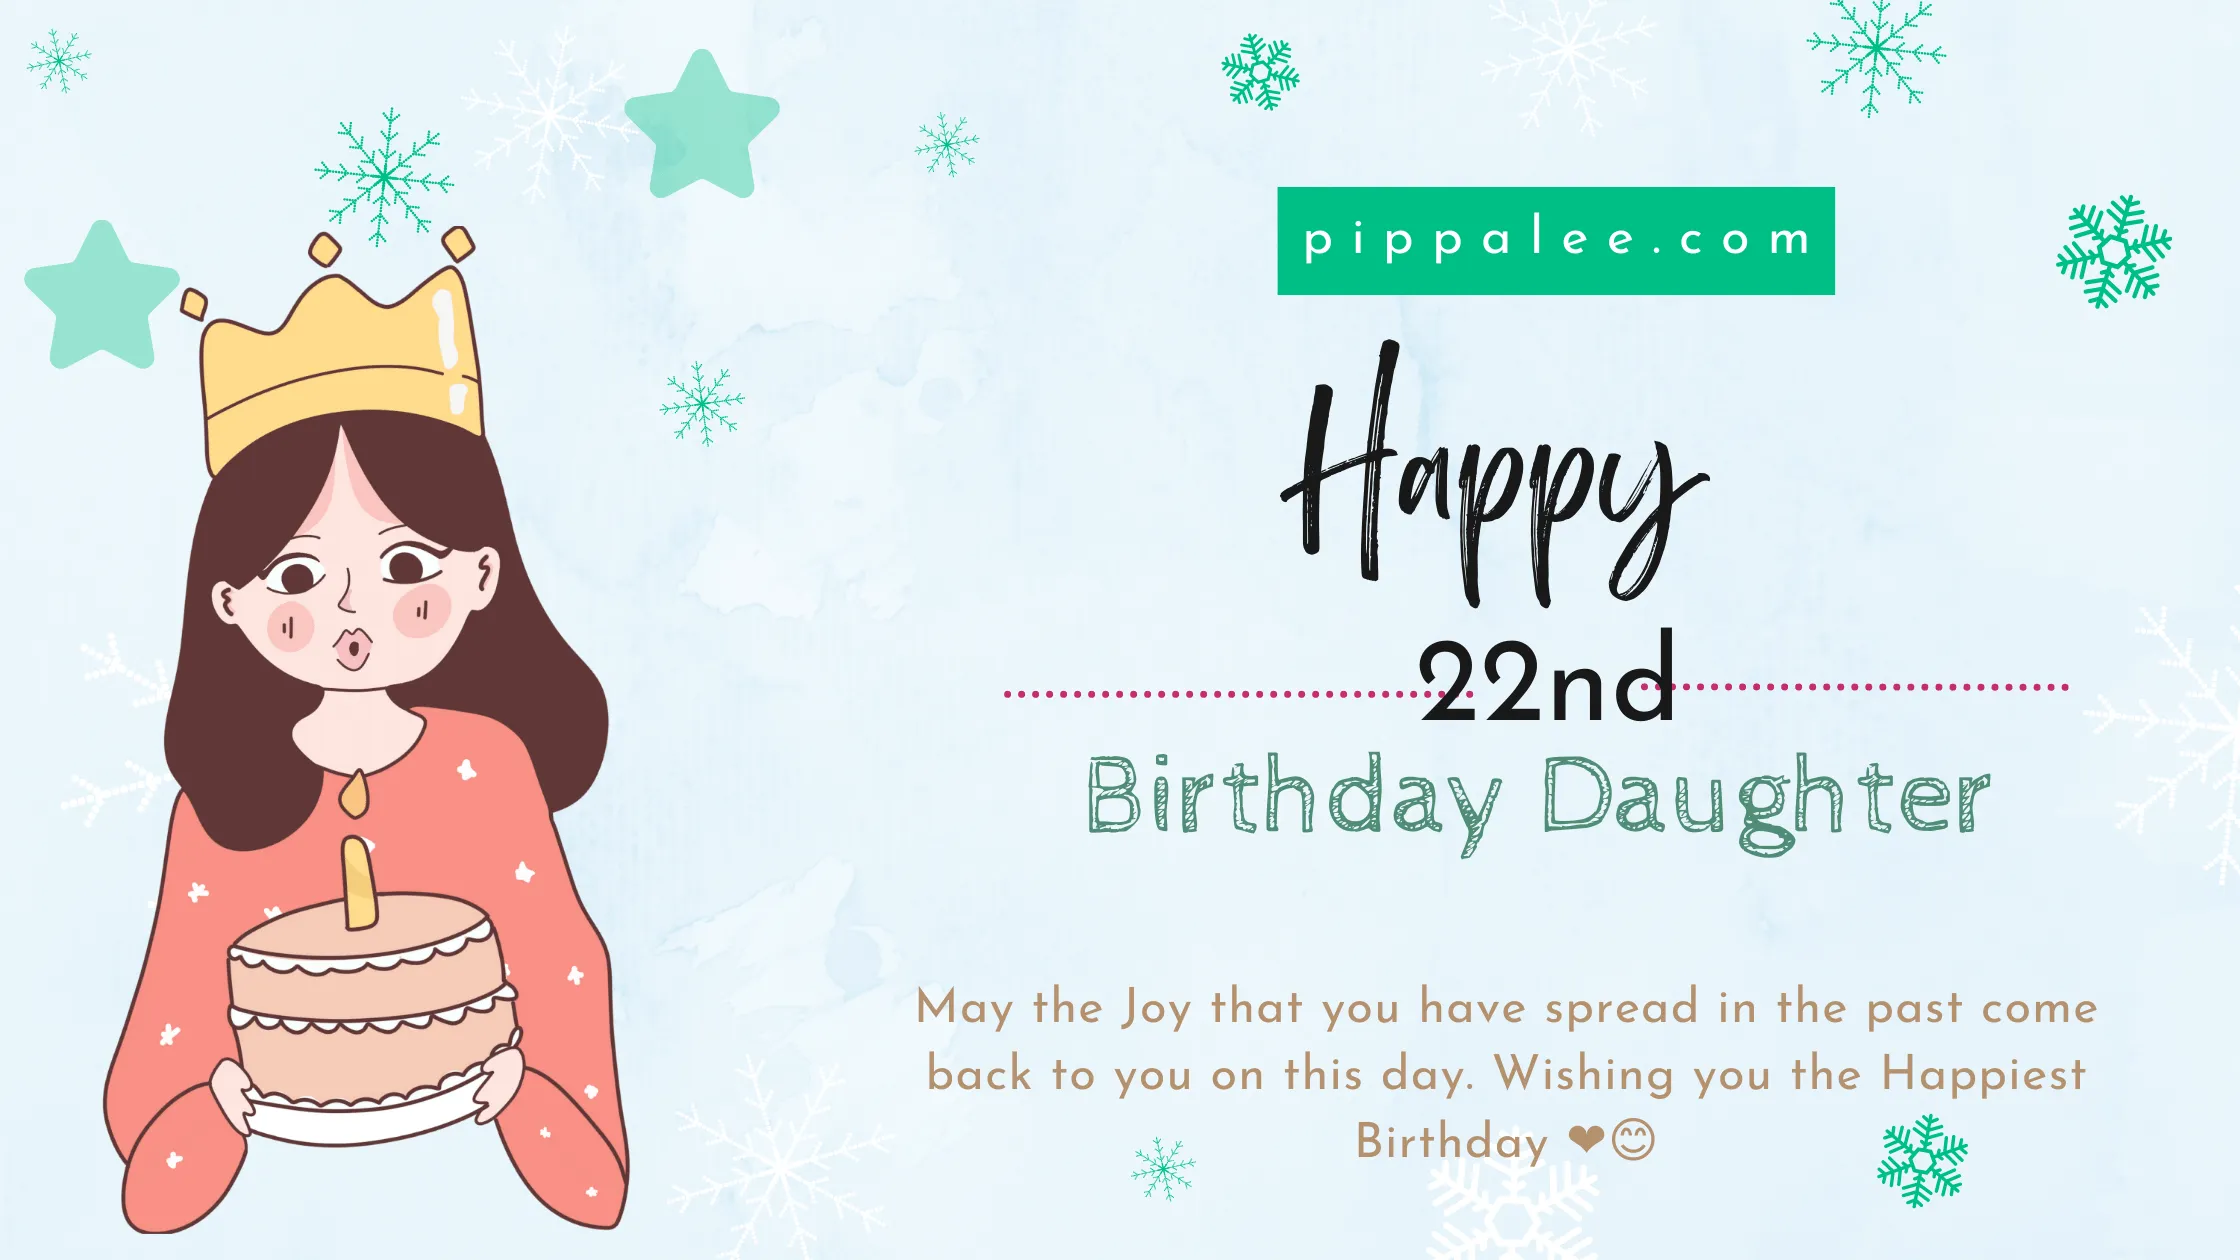 Happy 22nd Birthday Daughter - Wishes & Messages